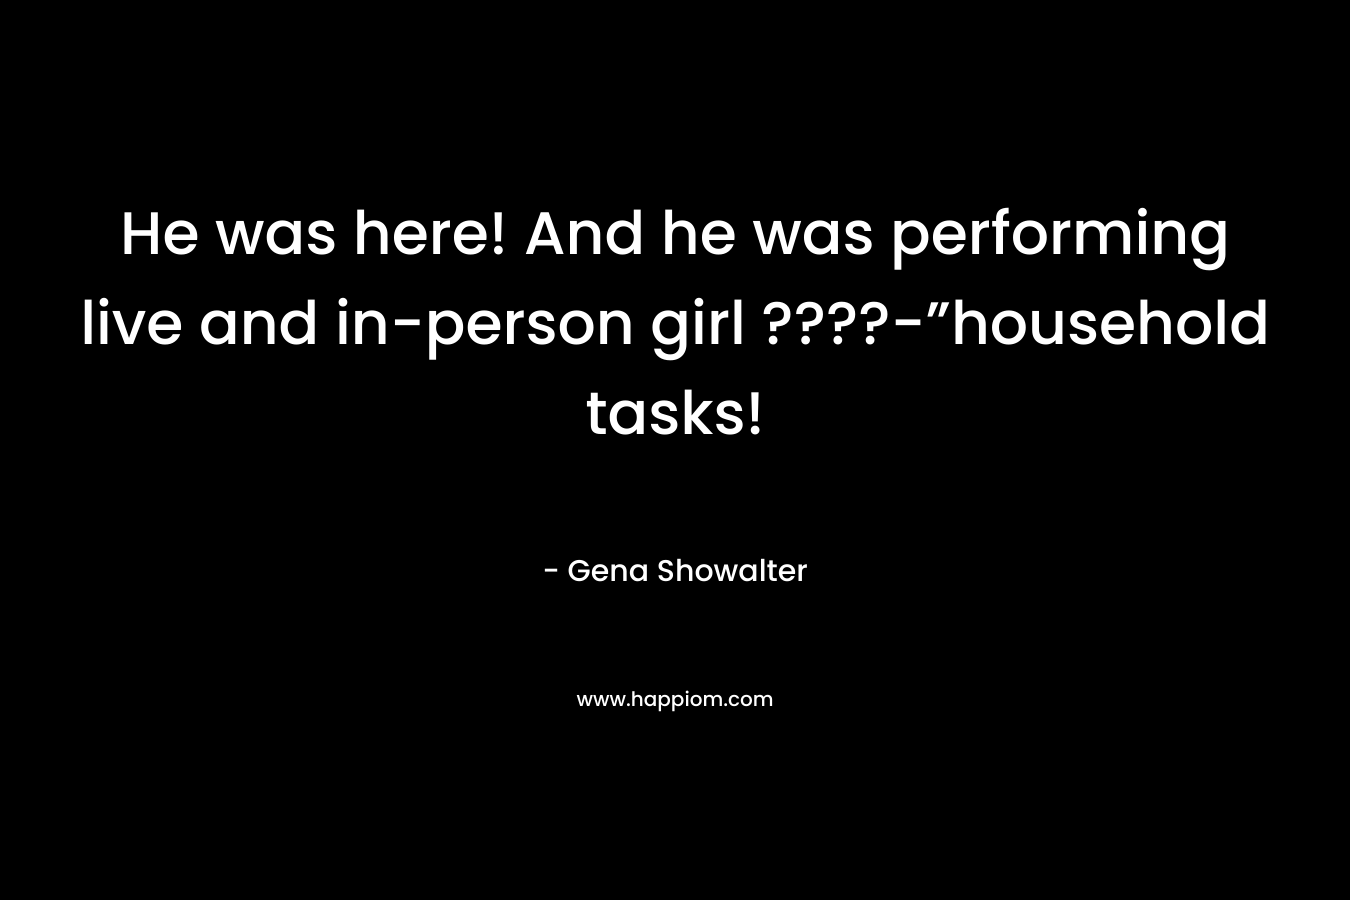 He was here! And he was performing live and in-person girl ????-”household tasks!